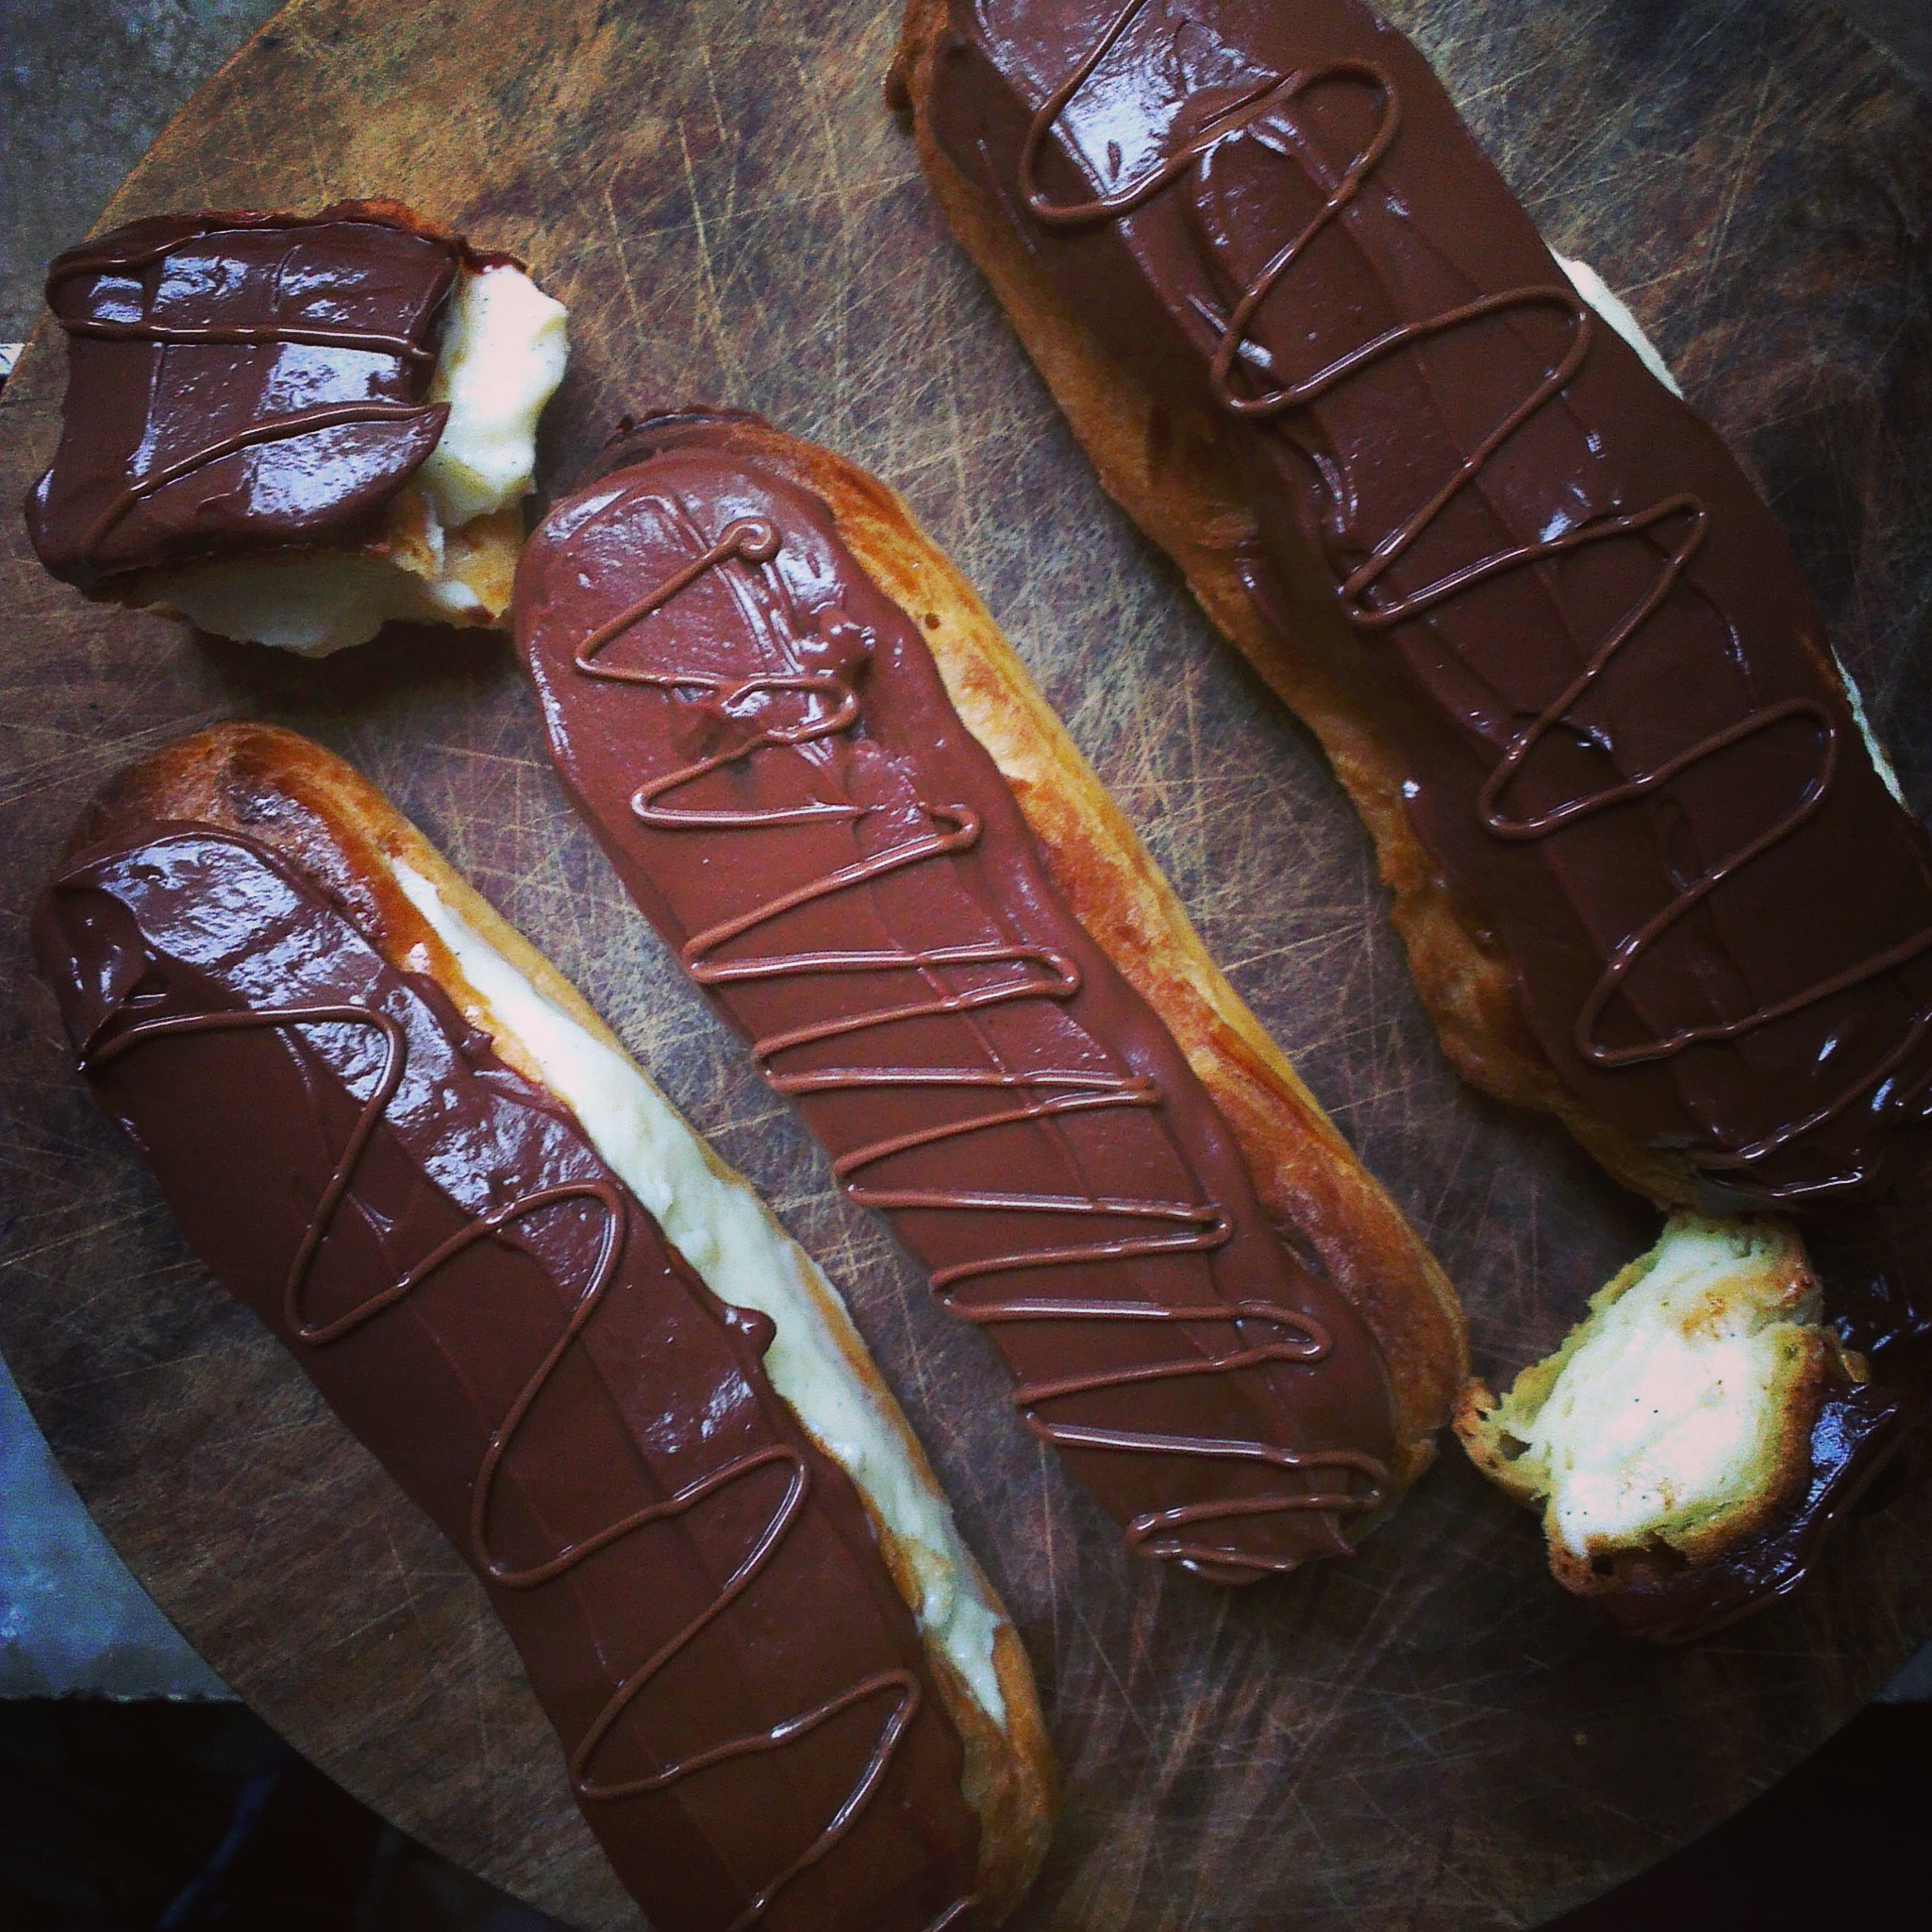 Chocolate eclairs with a touch of Nutella